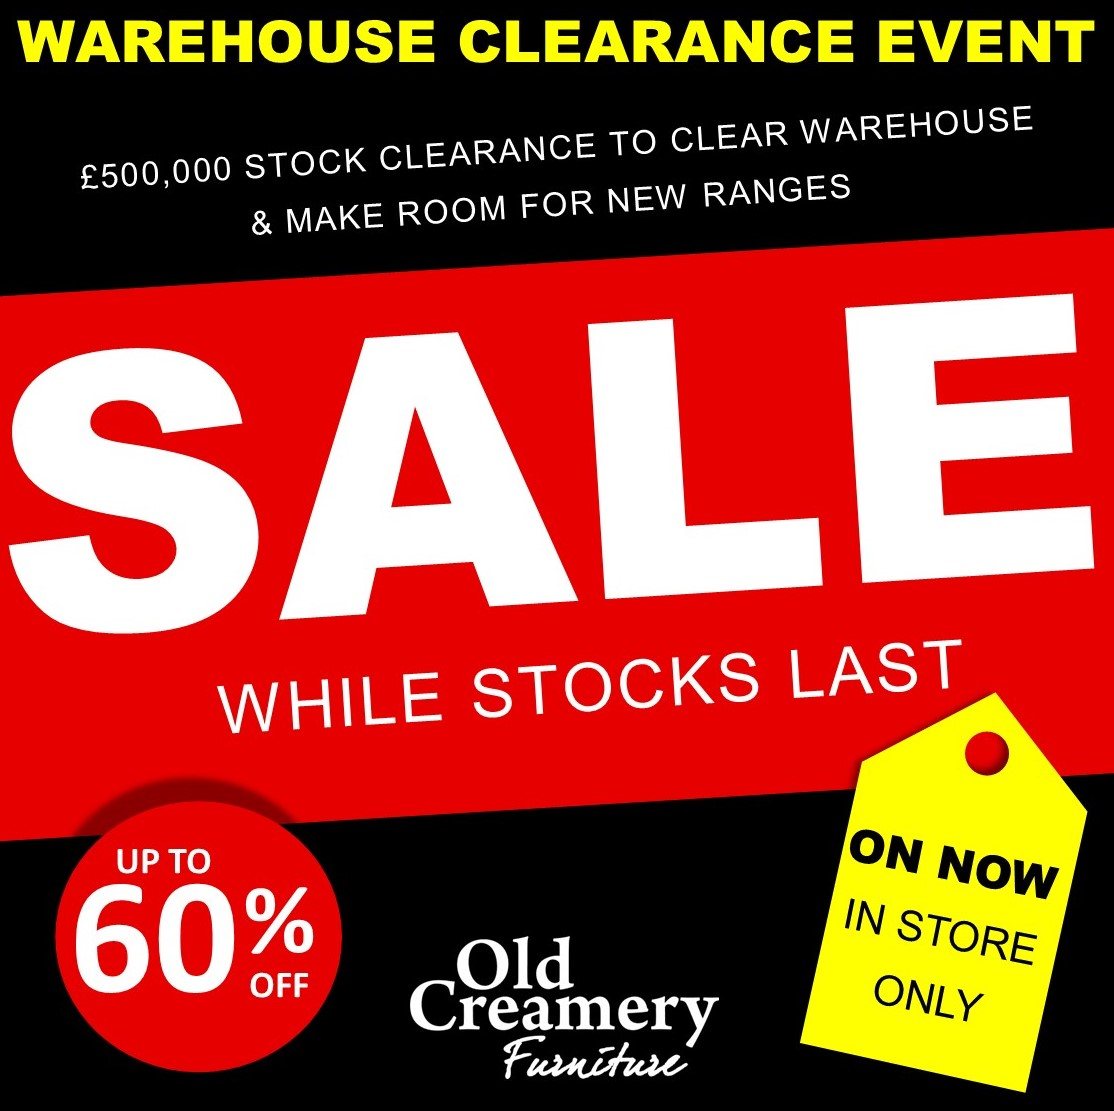 Old Creamery Furniture clearance event